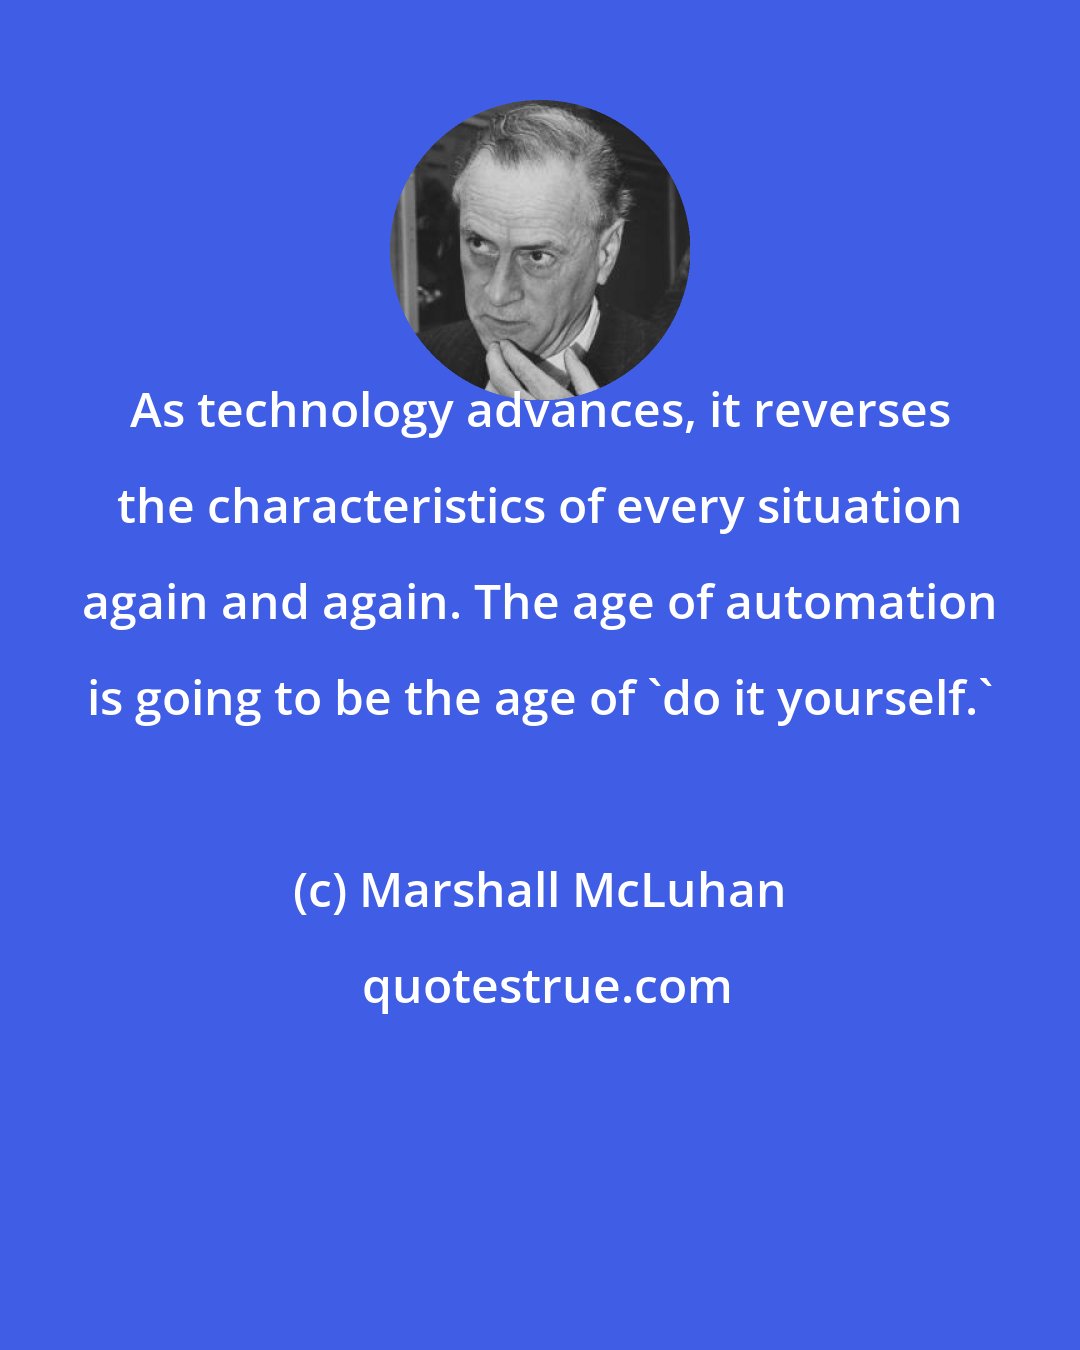 Marshall McLuhan: As technology advances, it reverses the characteristics of every situation again and again. The age of automation is going to be the age of 'do it yourself.'